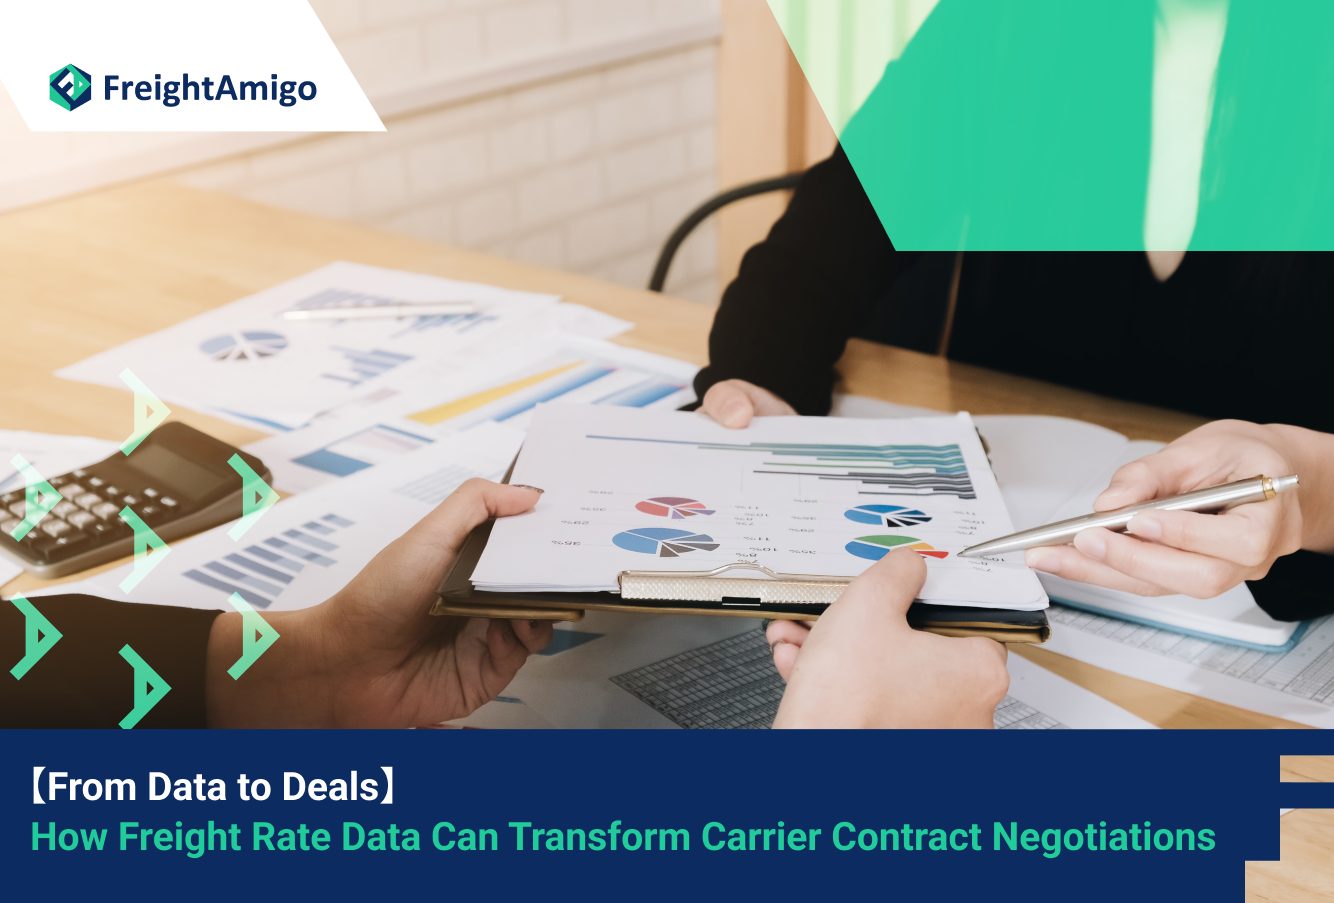 【From Data to Deals】How Freight Rate Data Can Transform Carrier Contract Negotiations